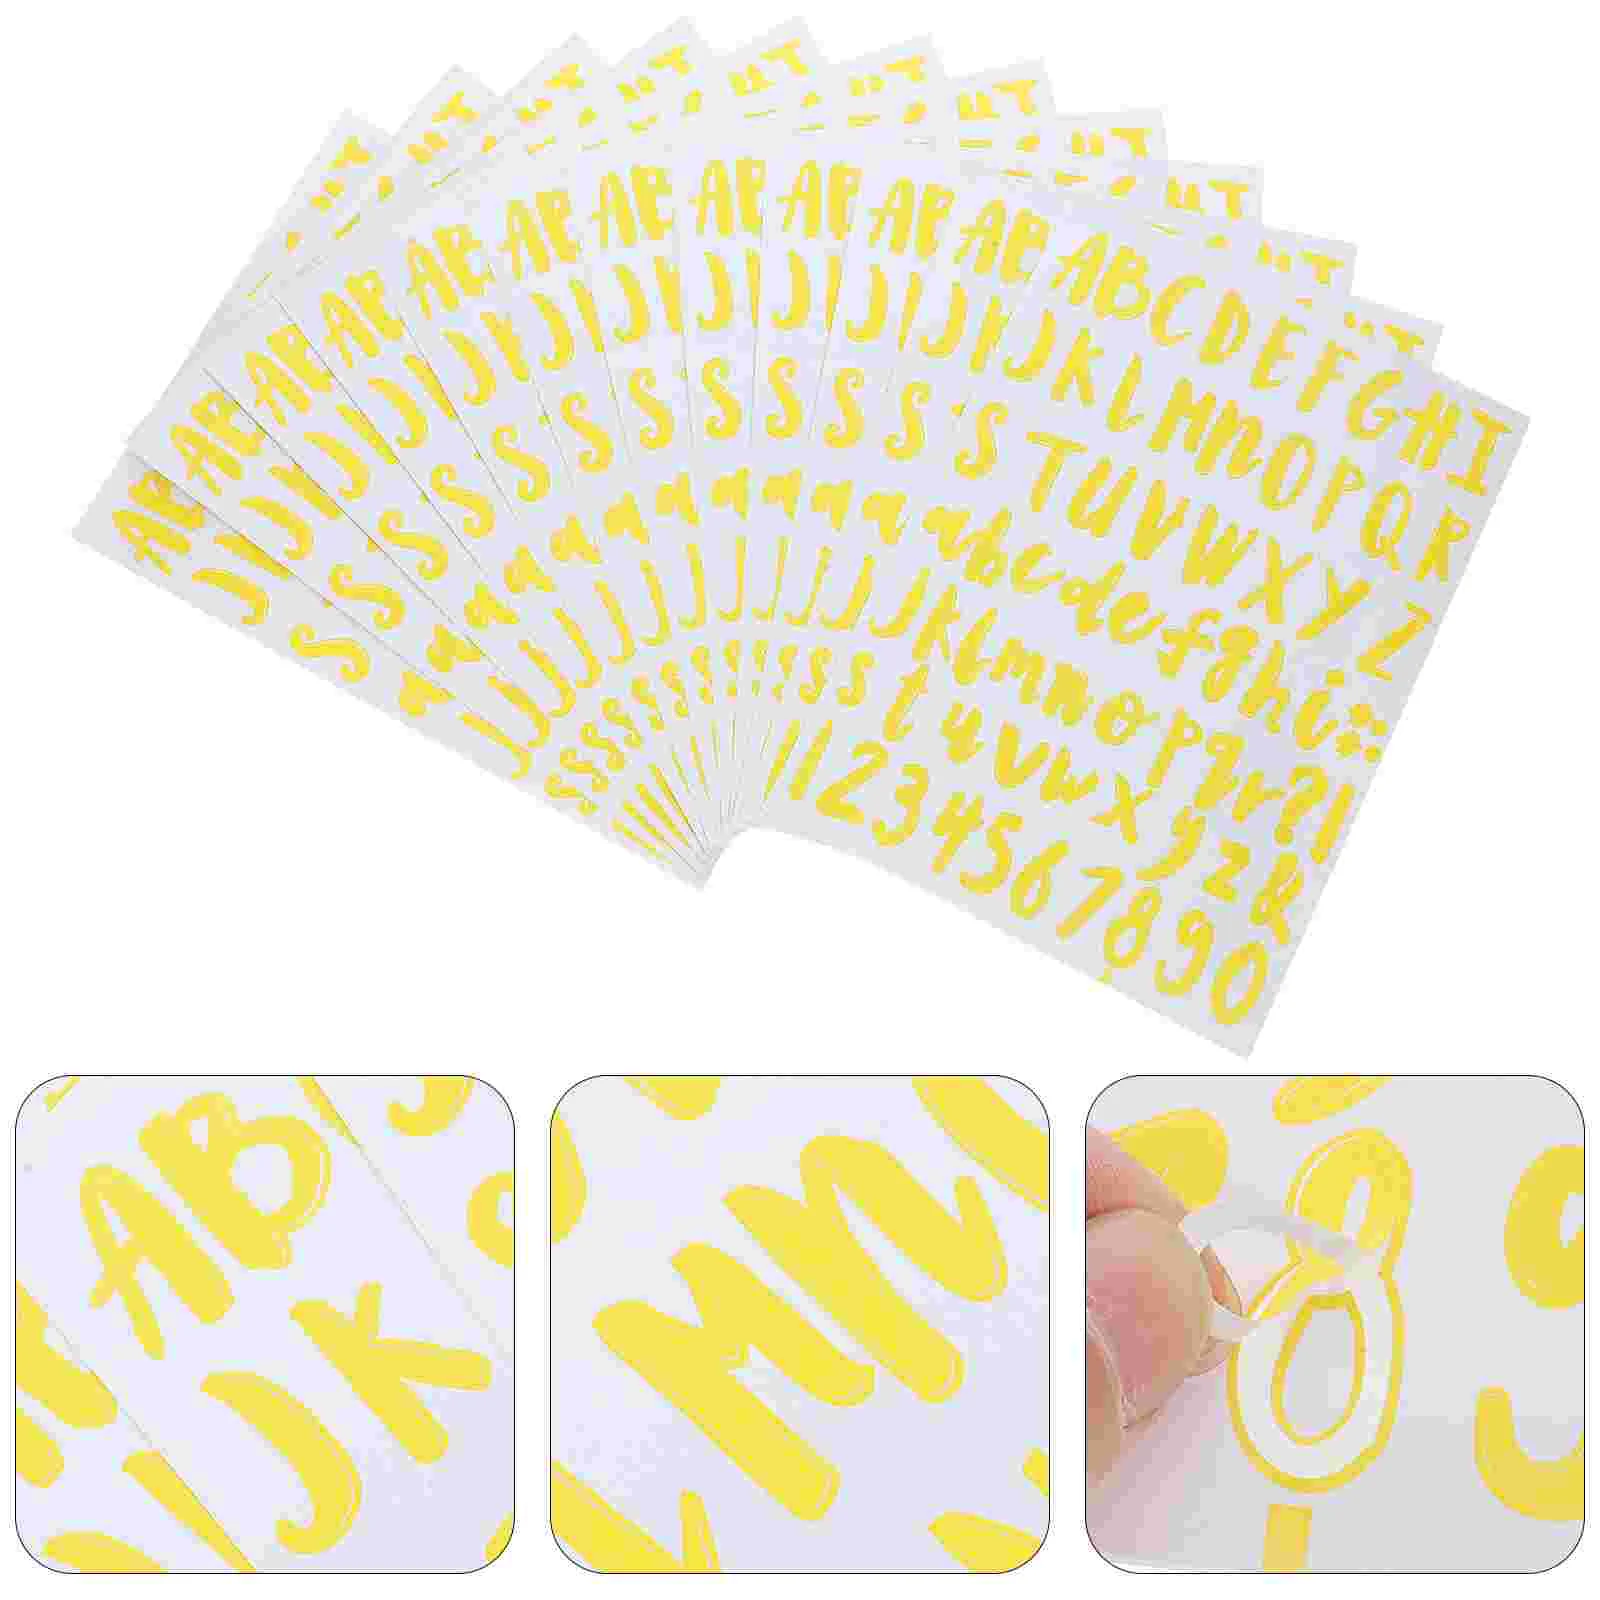 

12 Sheets Alphanumeric Stickers Letter Alphabet Number for Scrapbook Letters Poster Board Reflective Scrapbooking Trash Can